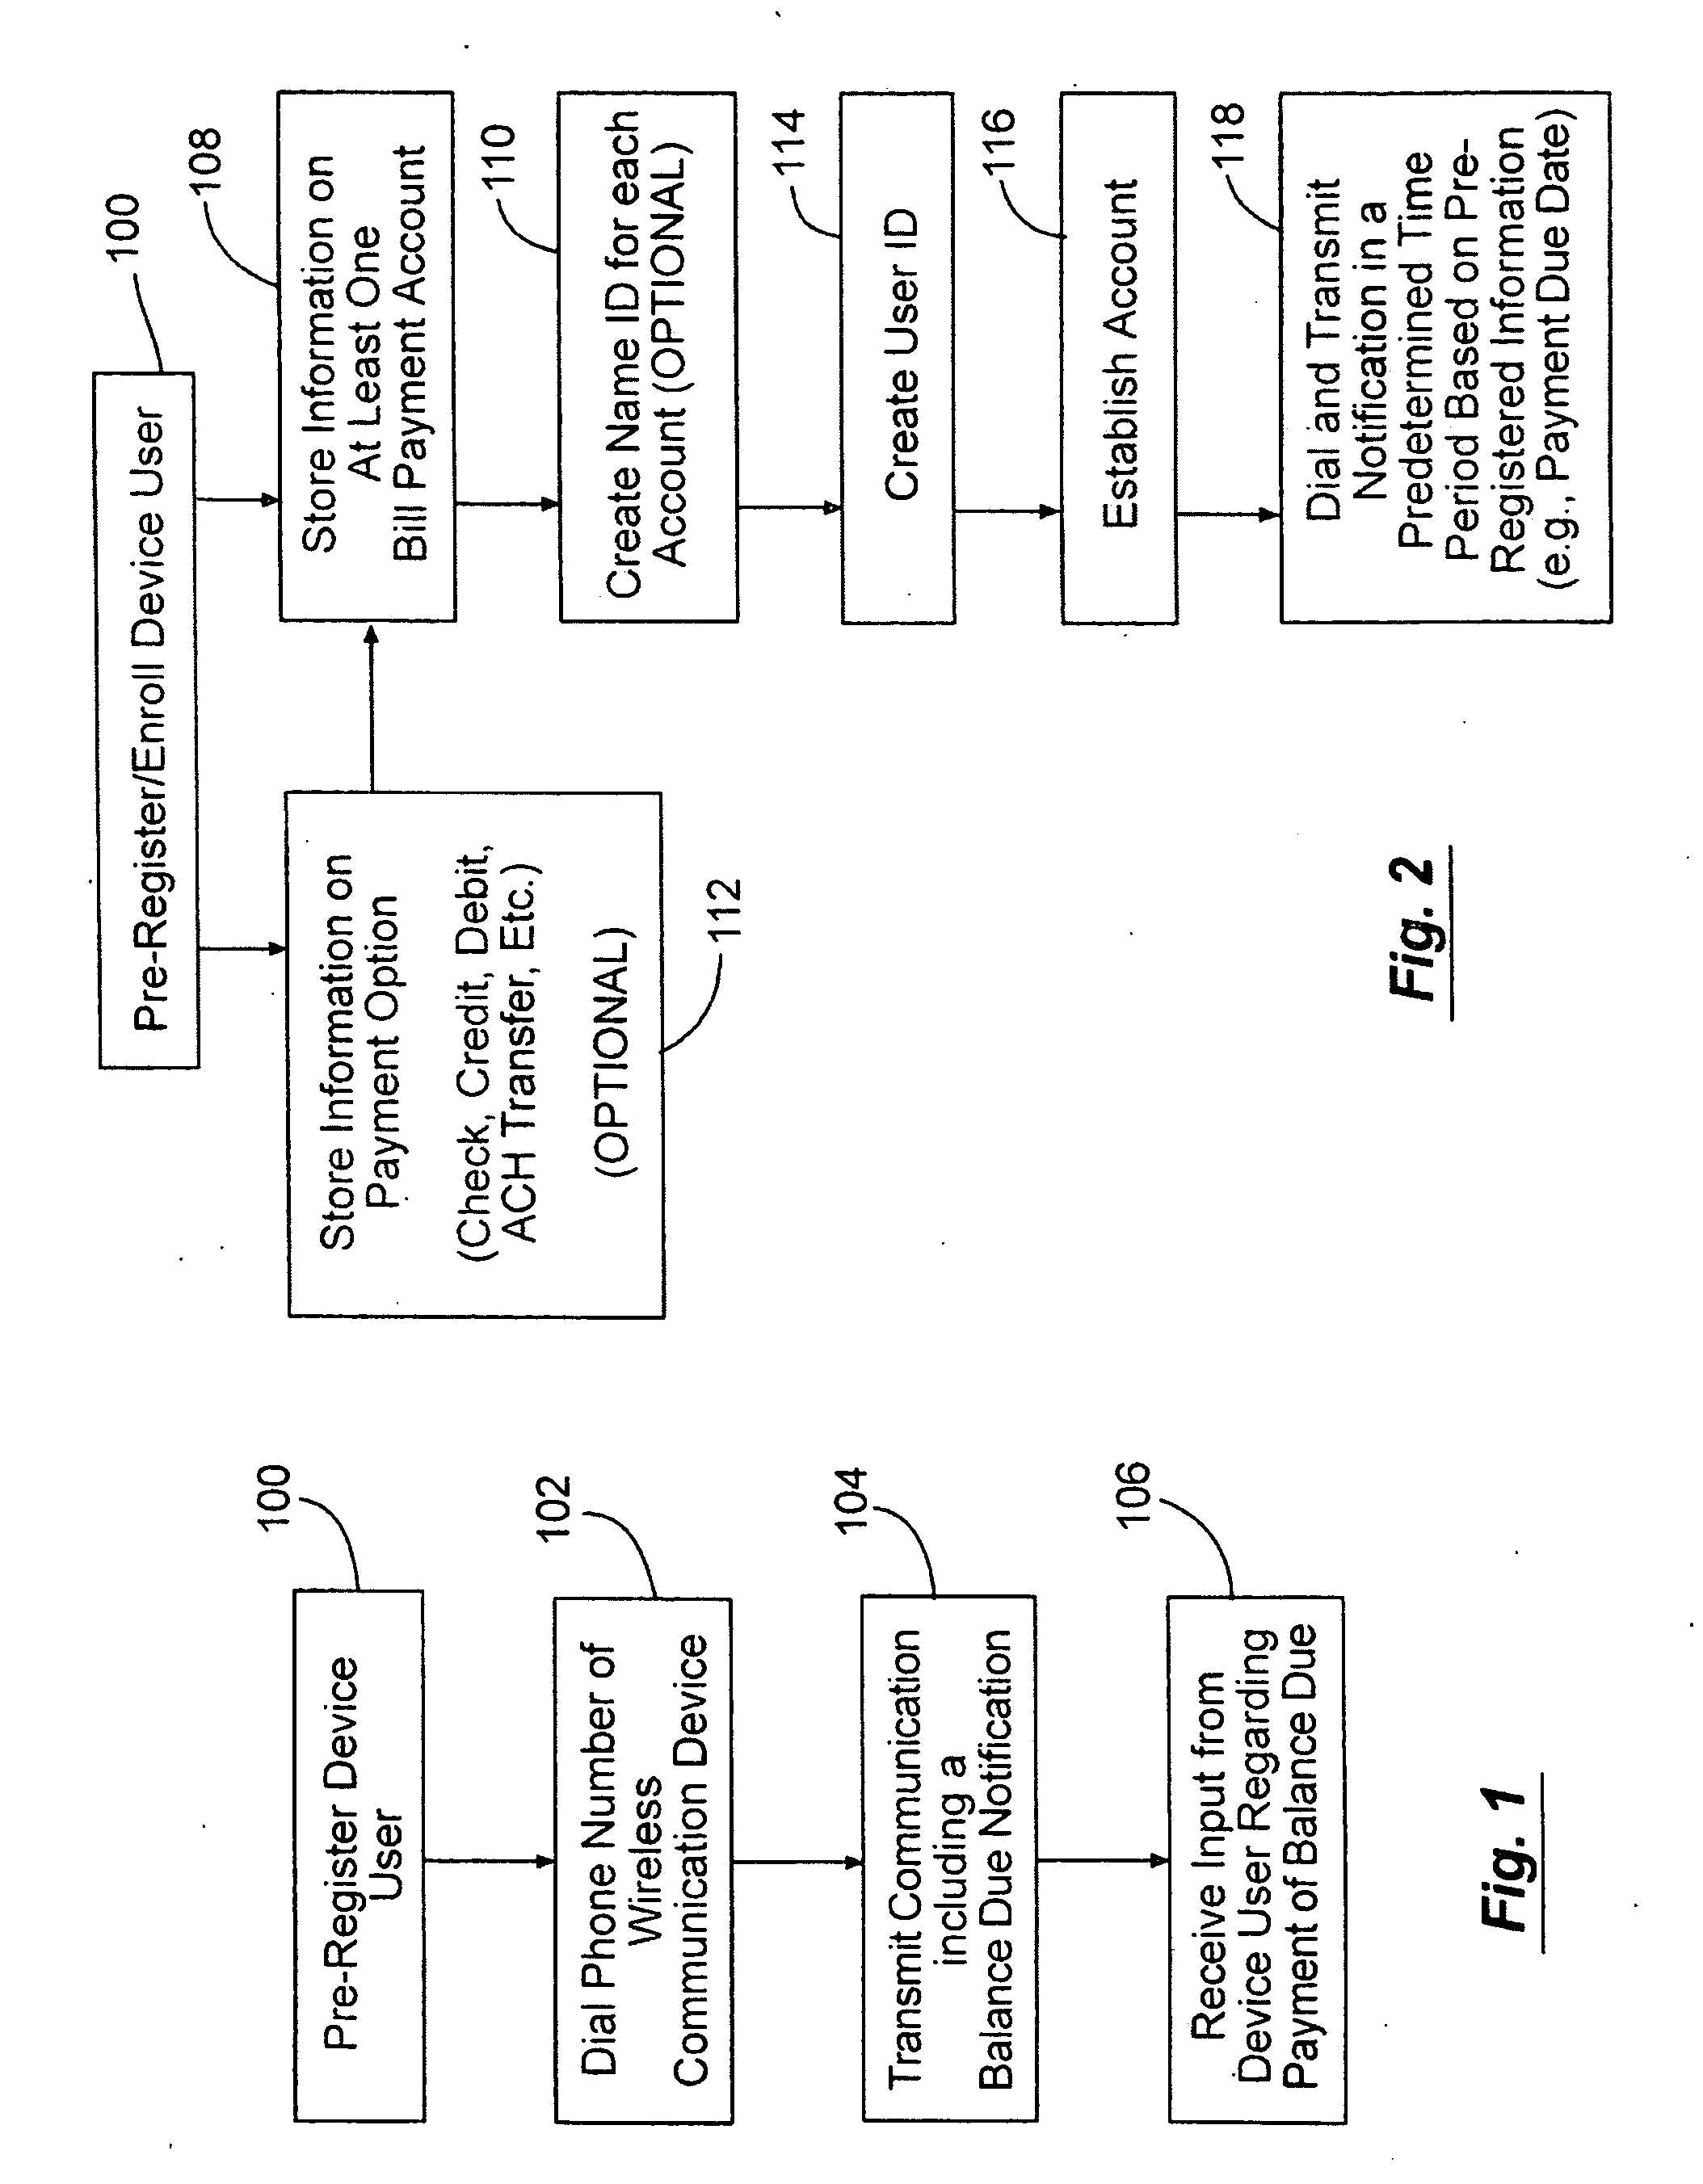 Wireless communication device account payment notification systems and methods